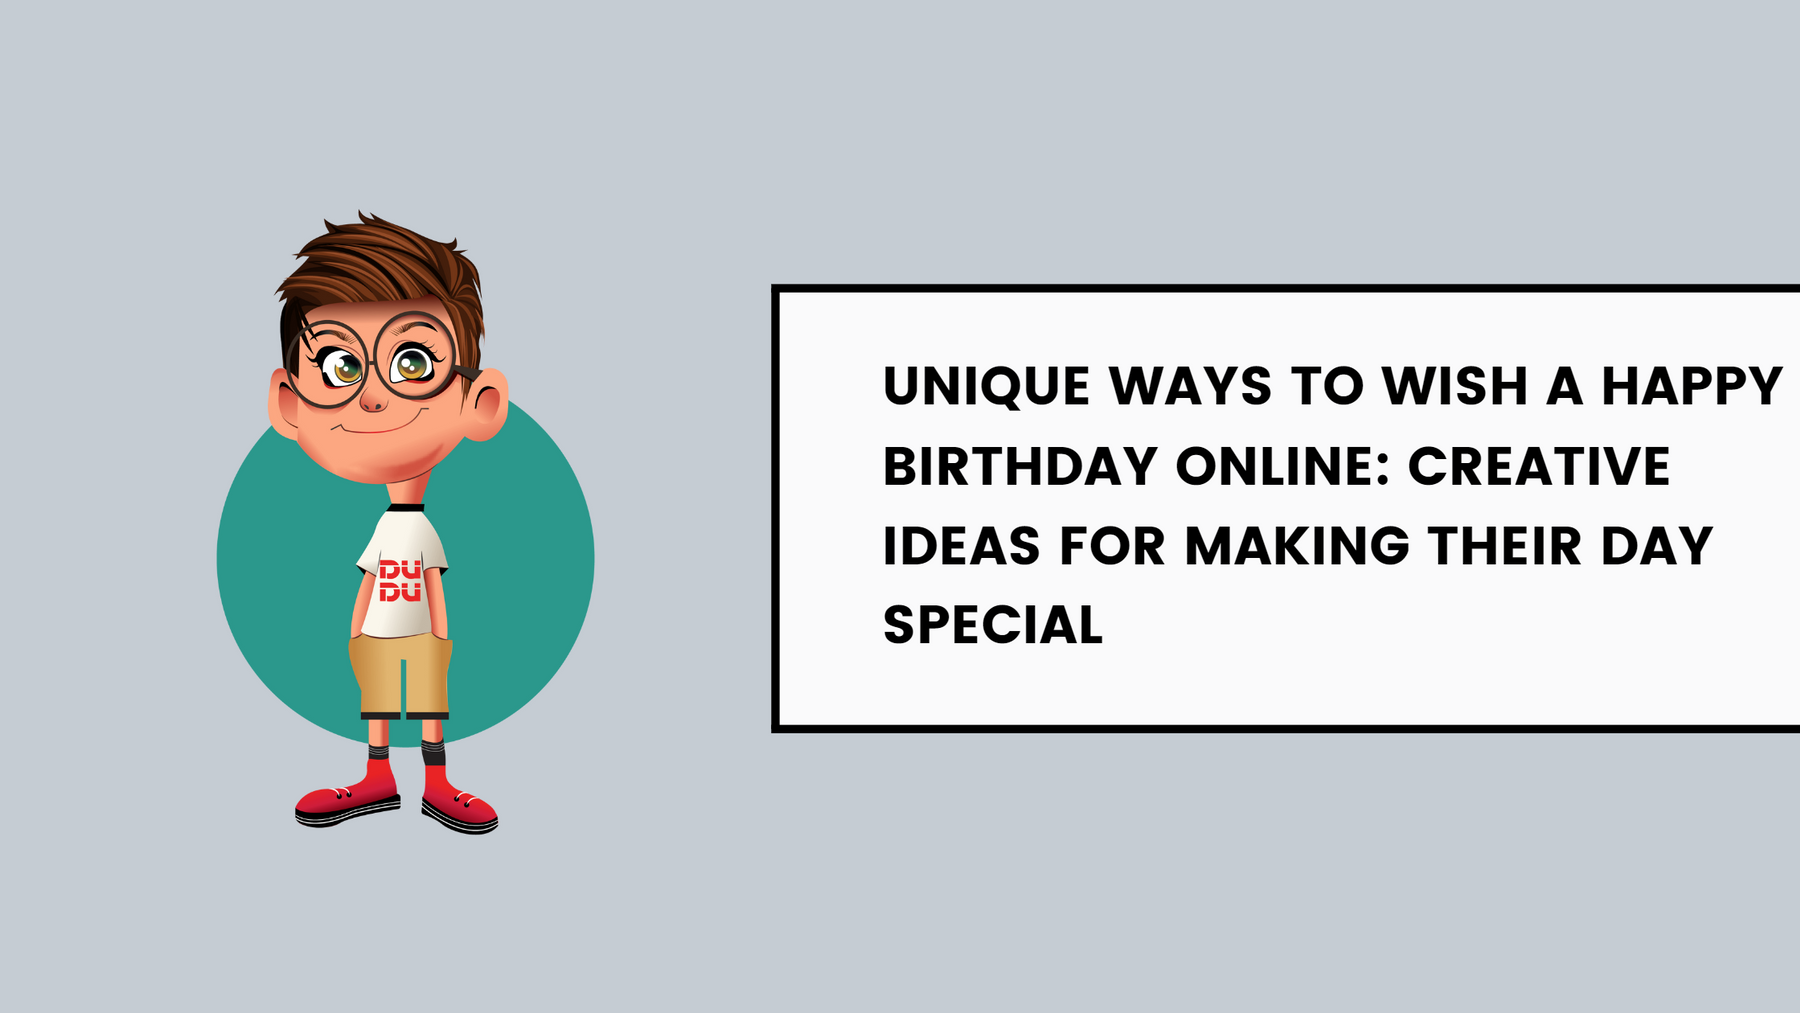 Unique Ways to Wish a Happy Birthday Online: Creative Ideas for Making Their Day Special